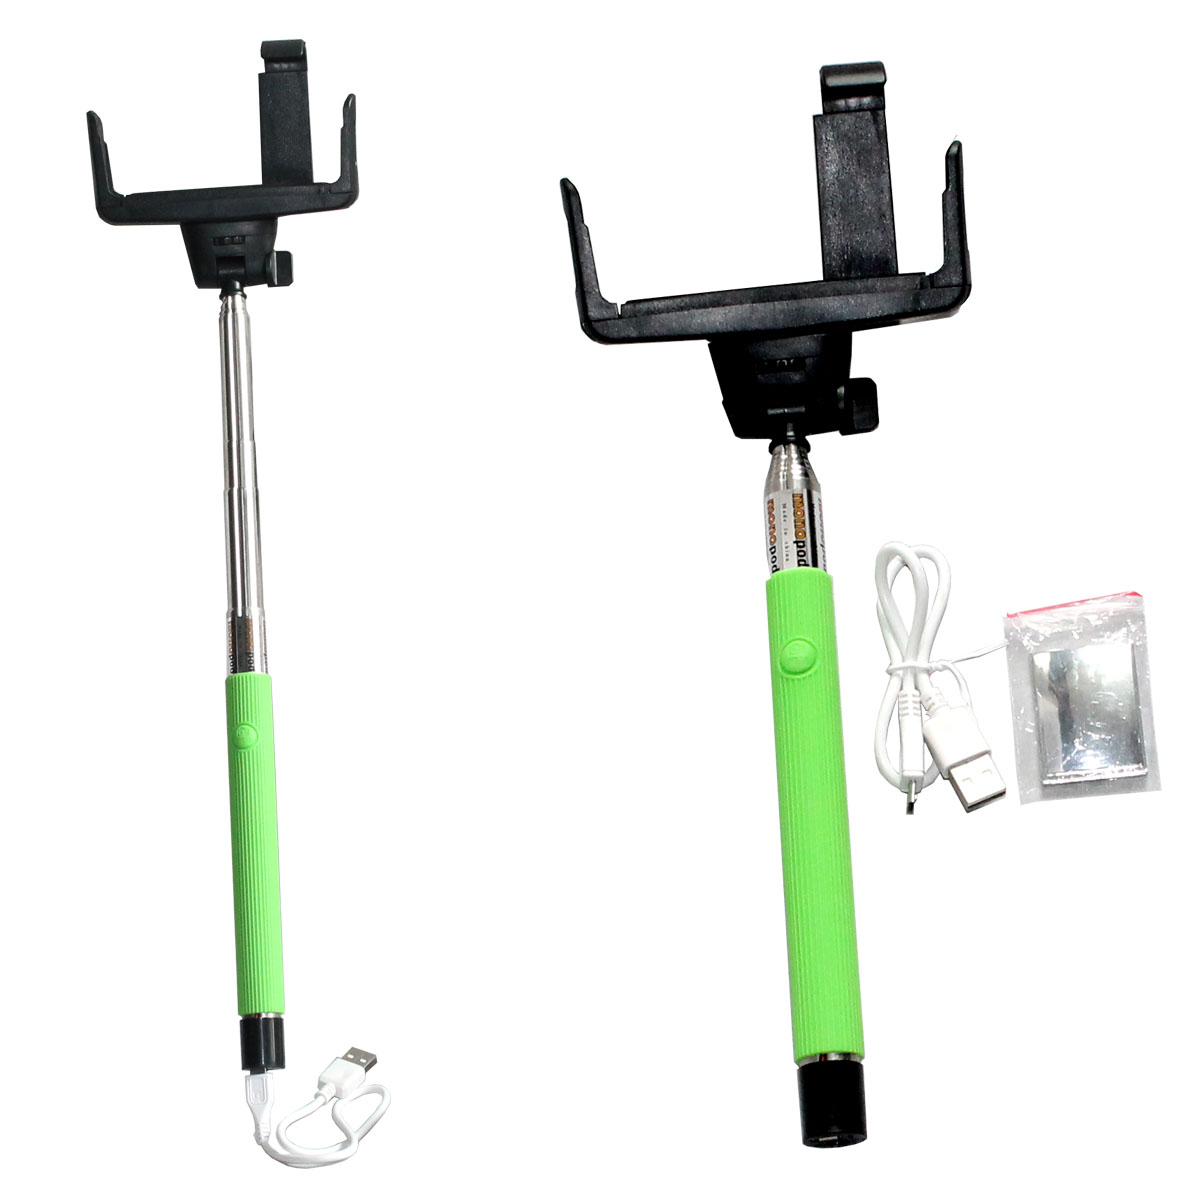 Selfie Stick with USB cable and mirror